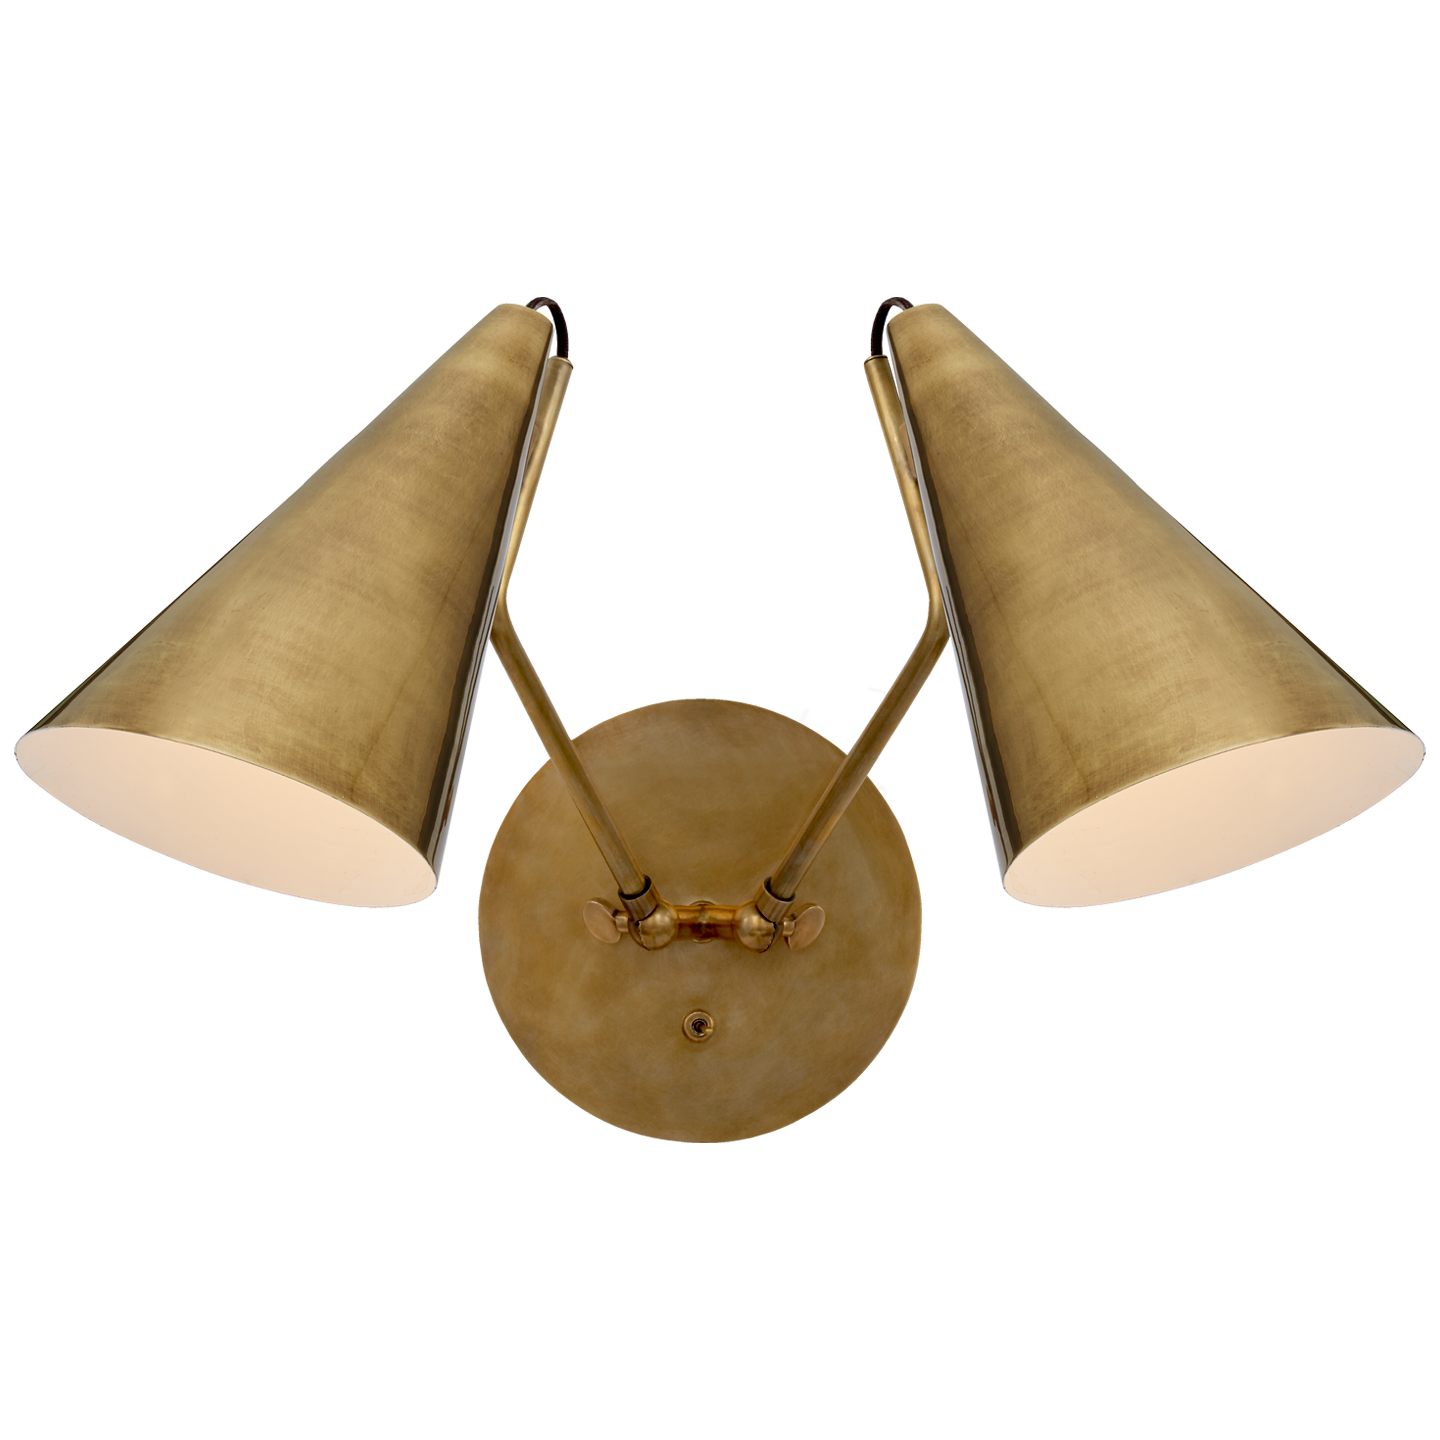 AERIN - Clemente Double Sconce in Hand-Rubbed Antique Brass - Becker Minty